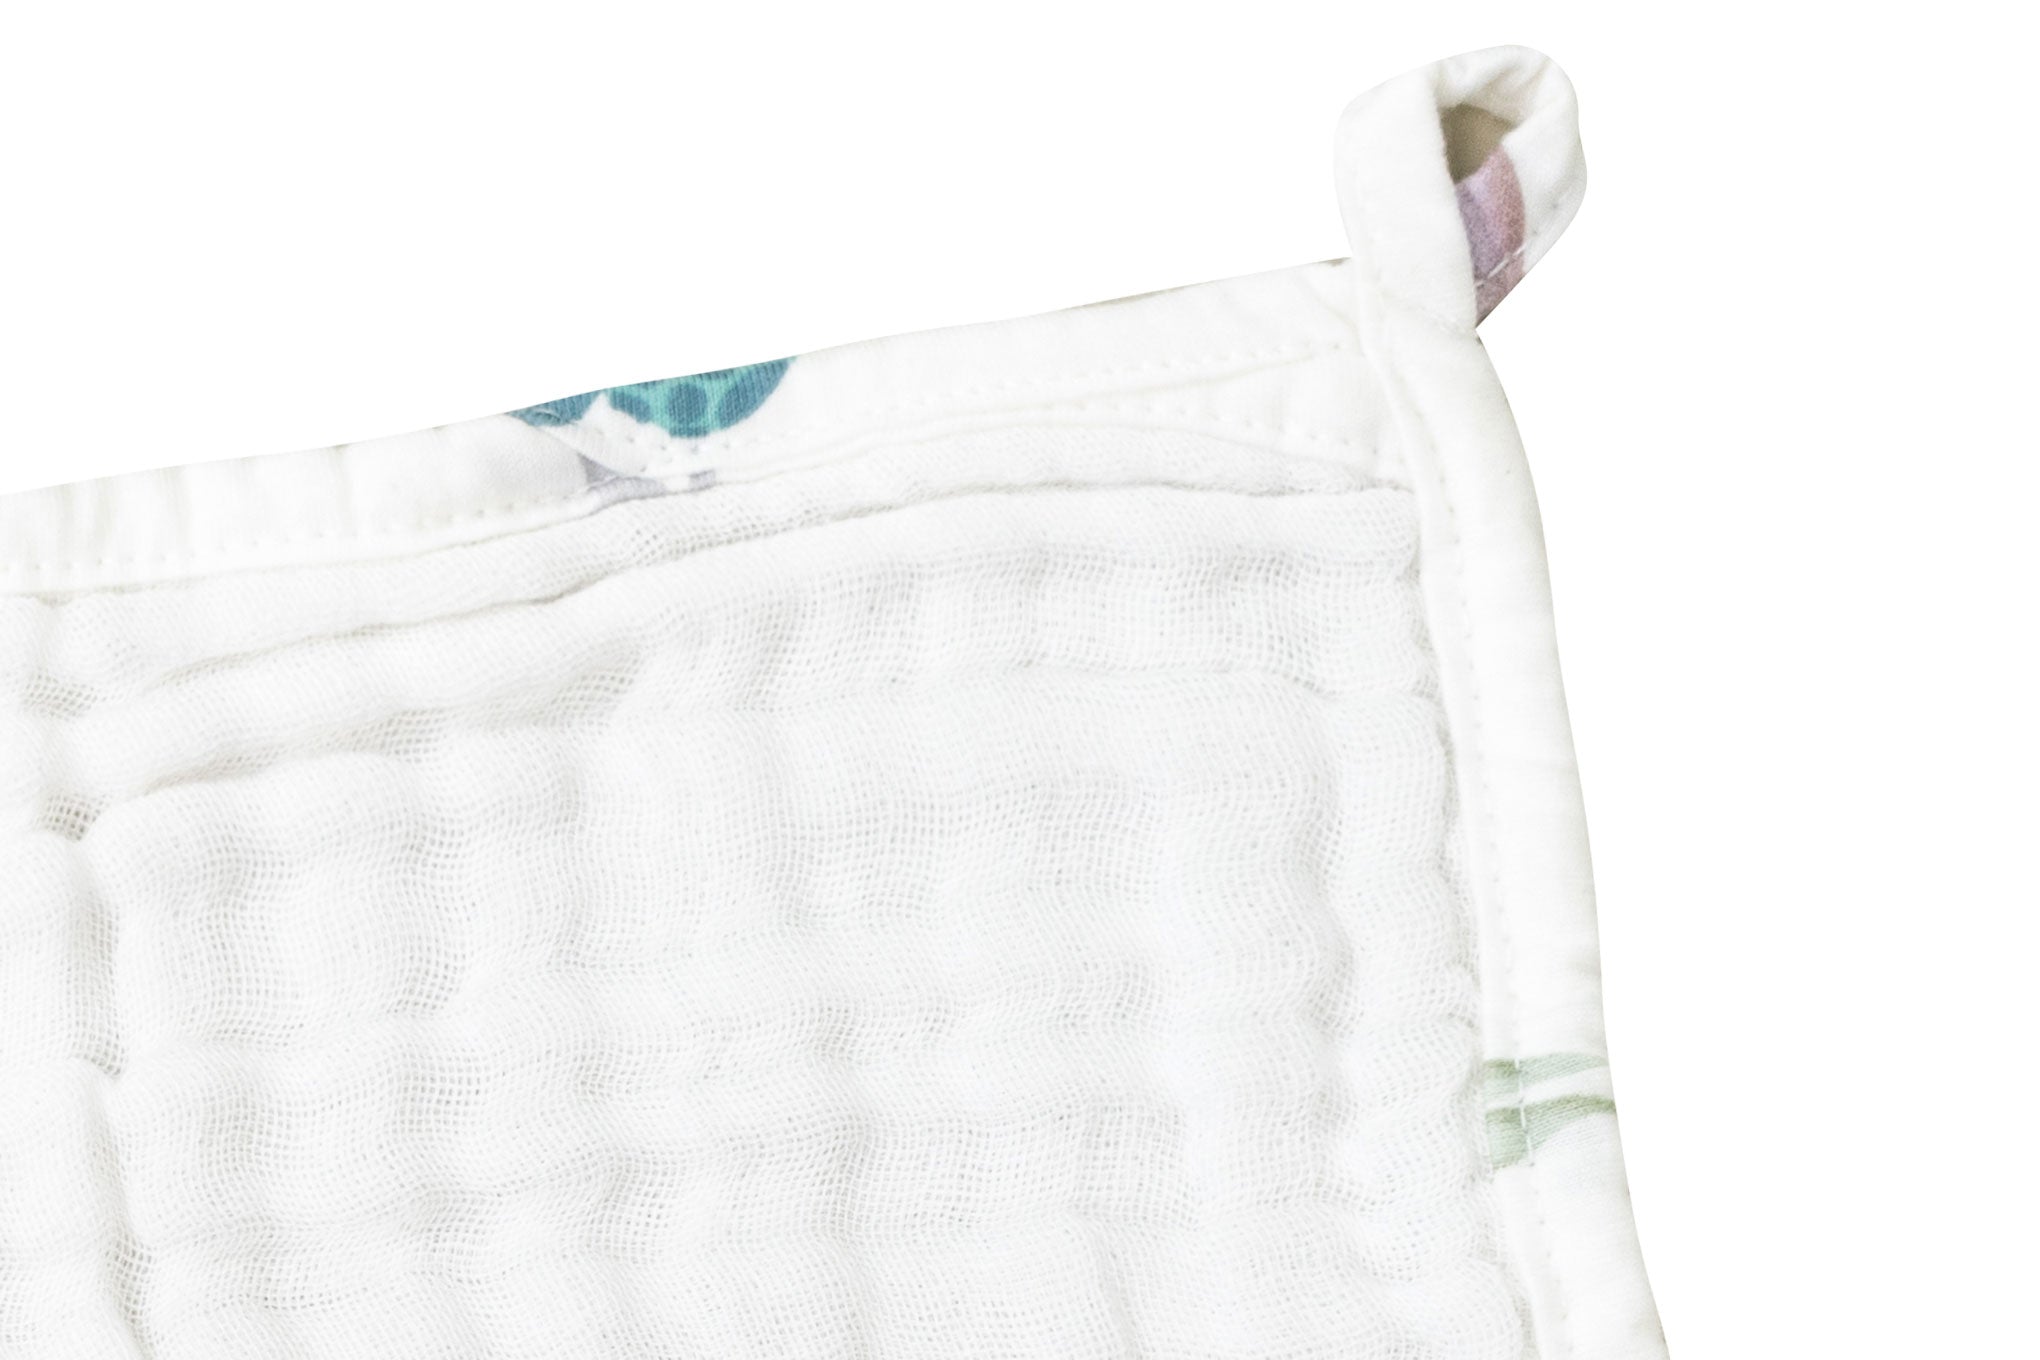 9-Layer Hooded Baby Bath Towel (Organic Cotton) - The Tortoise & The Hare